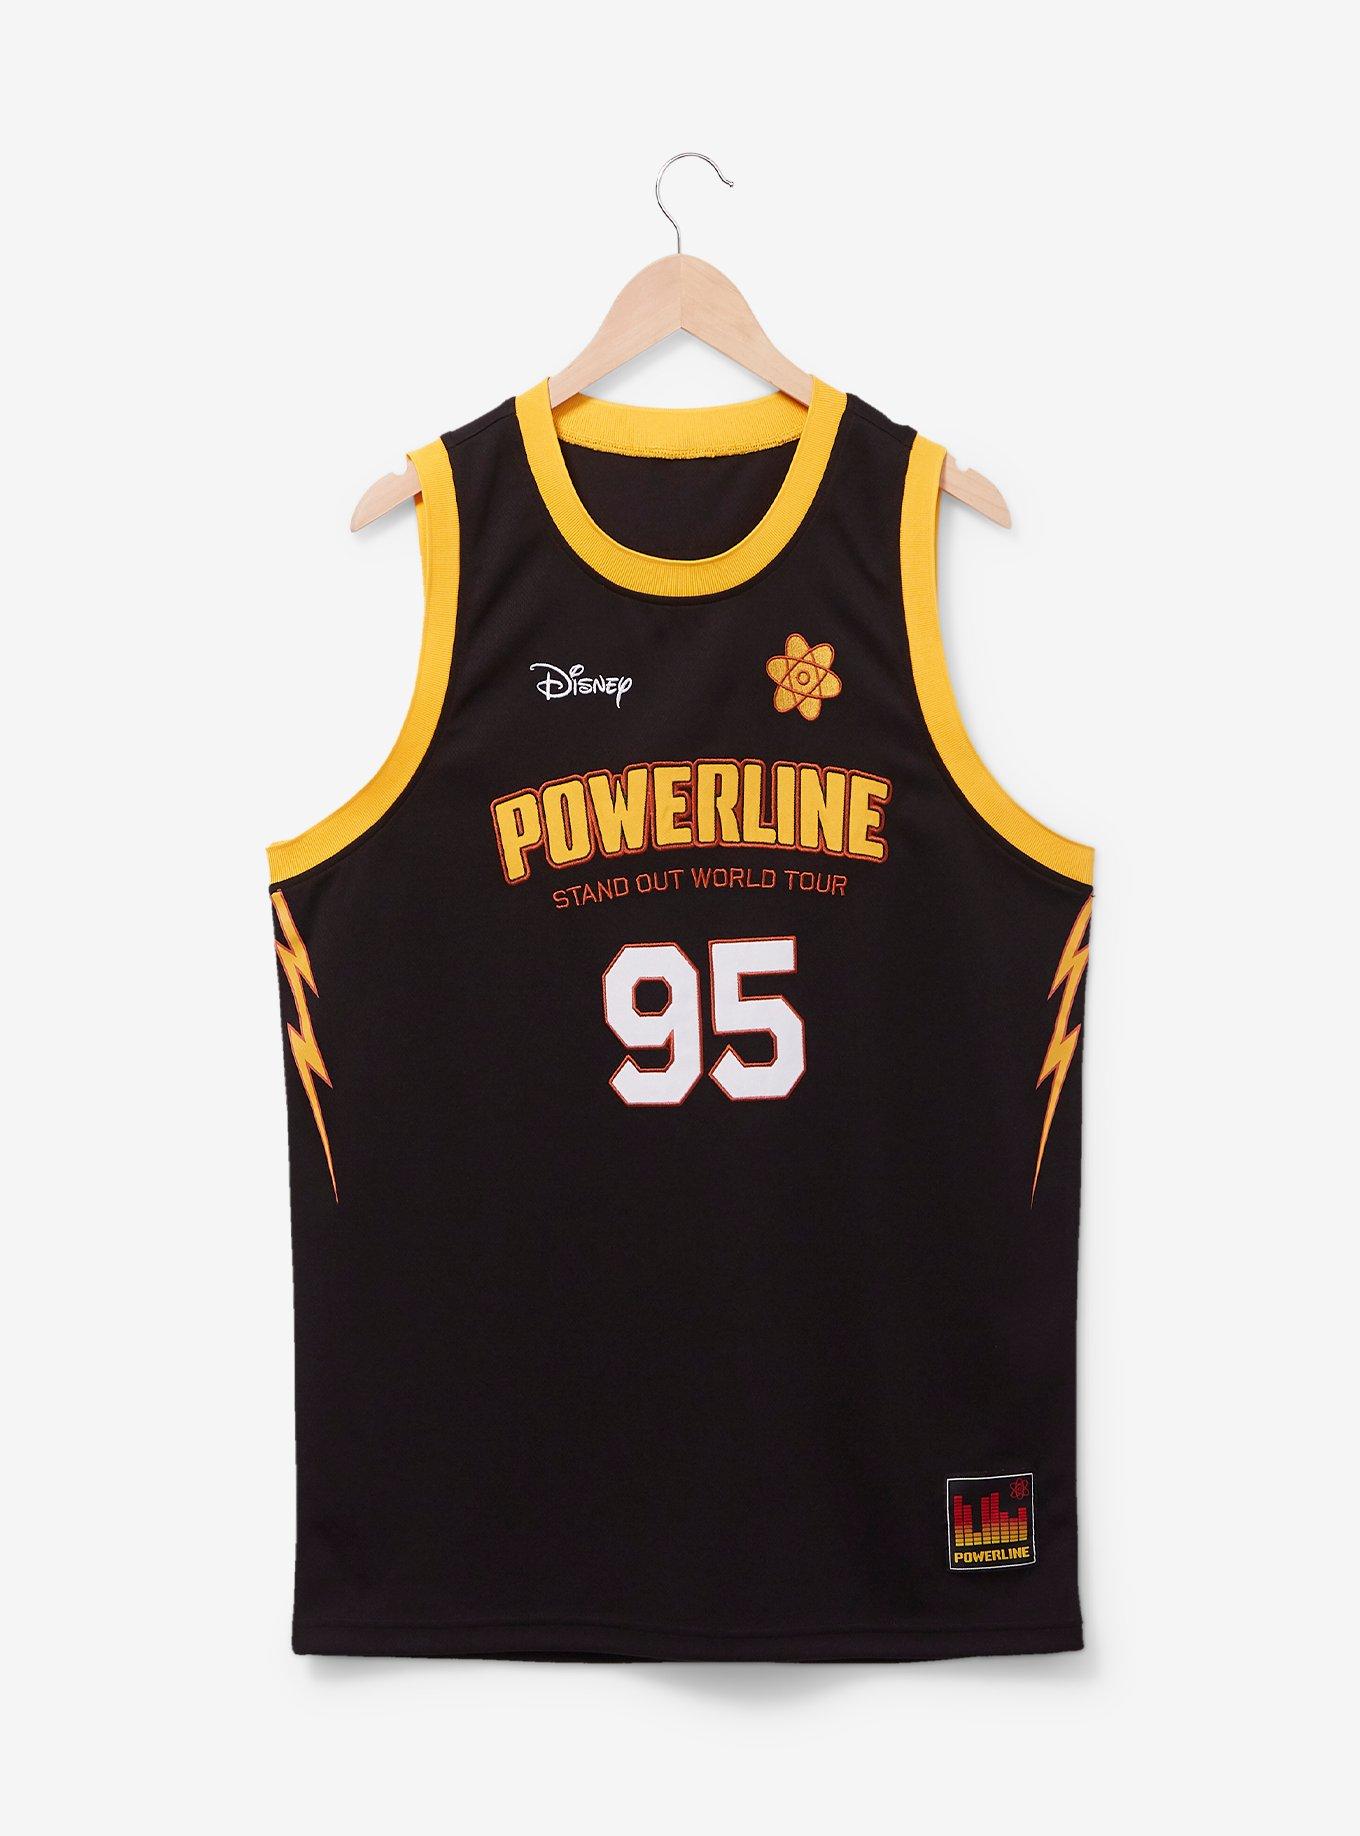 Crew-Neck Basketball Jersey | Death Row Apparel | King Ice Yellow / S